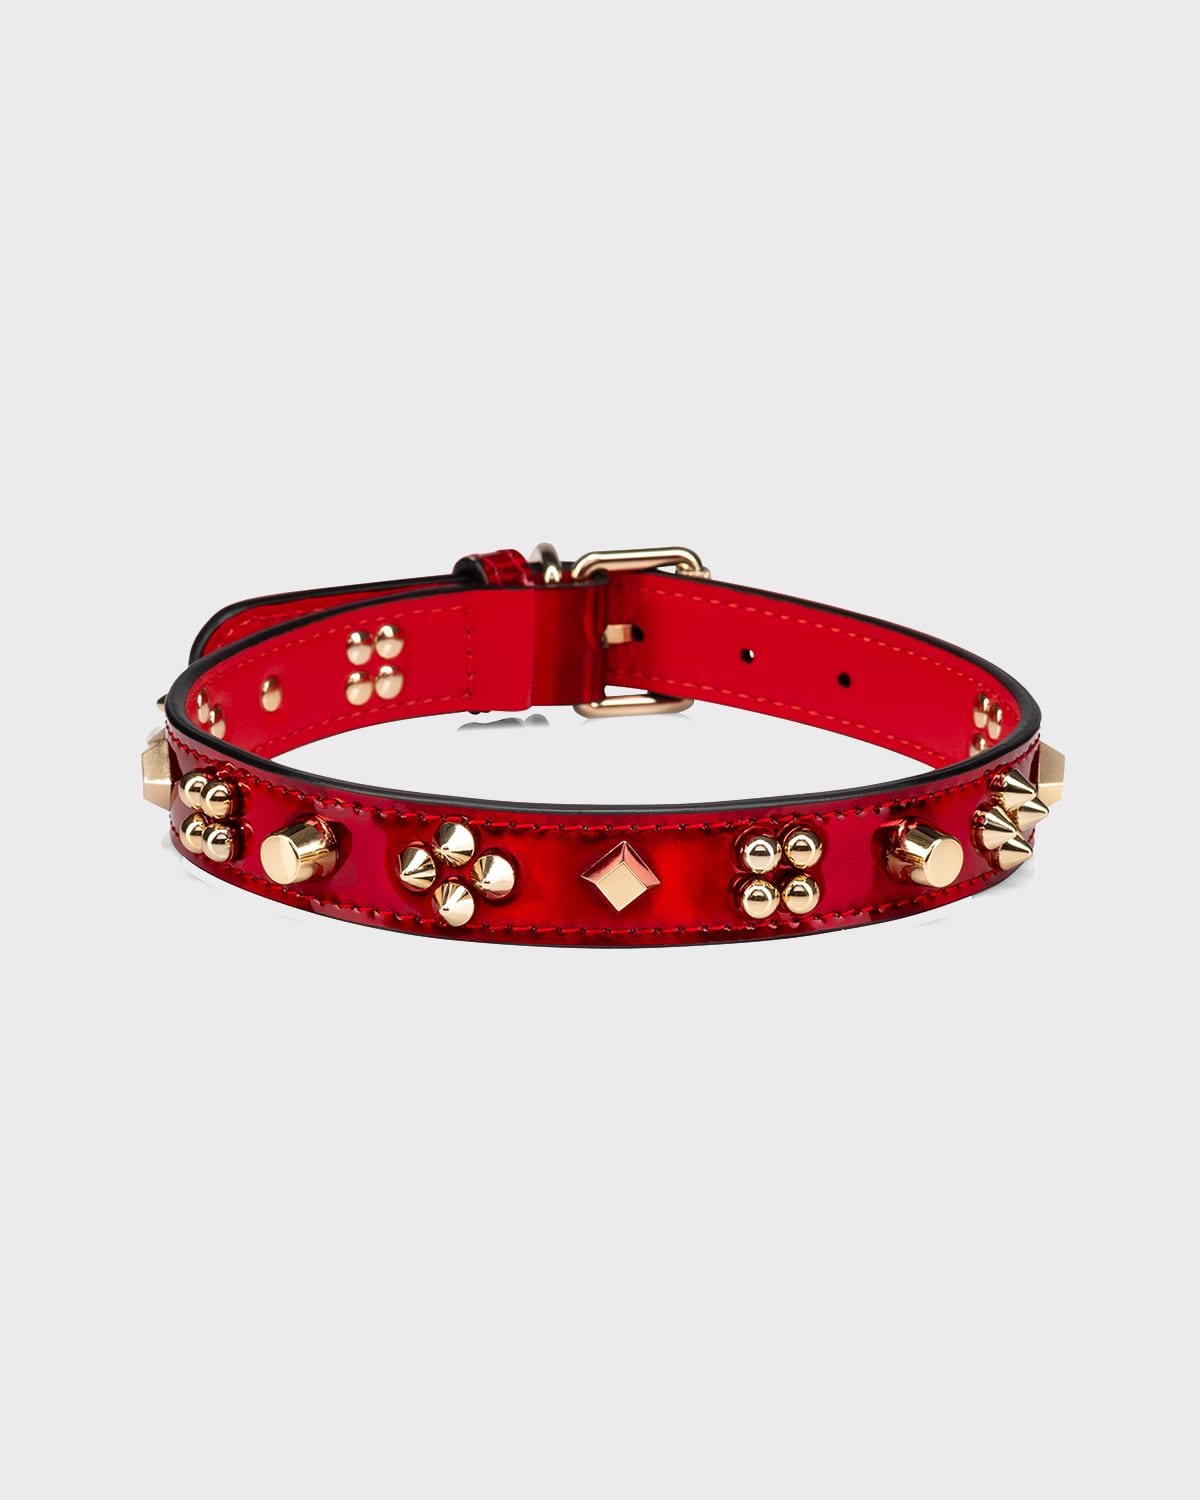 Christian Louboutin Loubicollar Psychic Patent Leather Dog Collar With Cara Spikes, Medium In Red